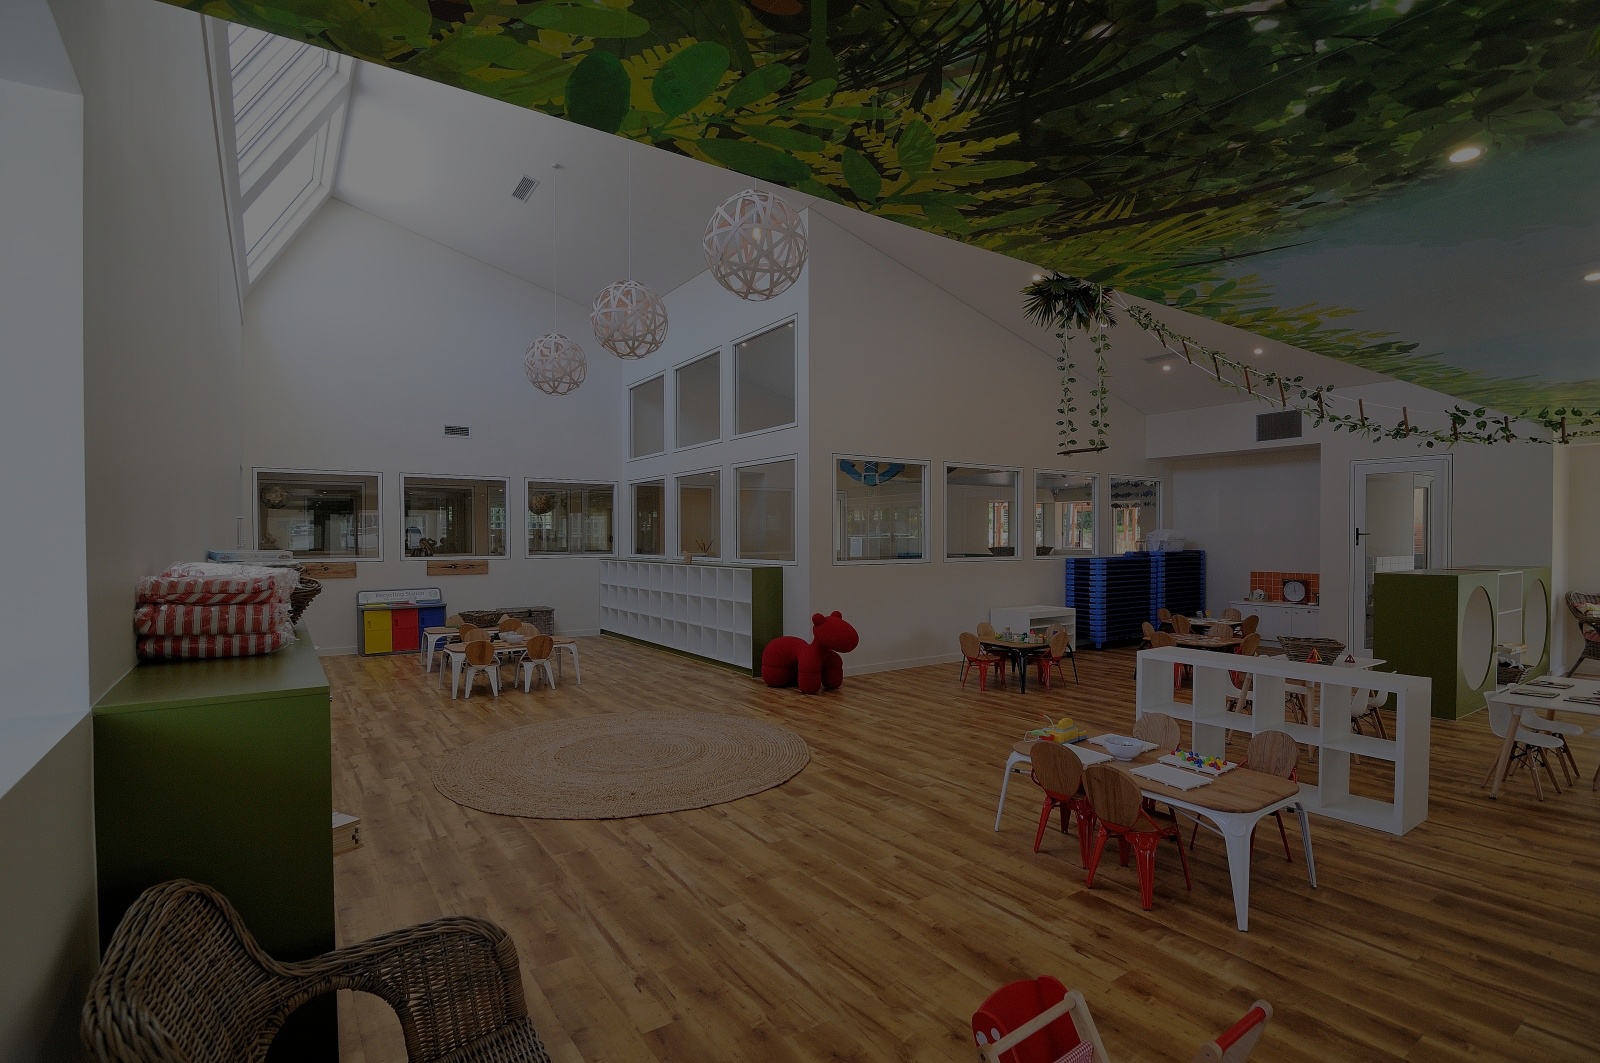 Quality Childcare Architectural Designs Artmade Architects